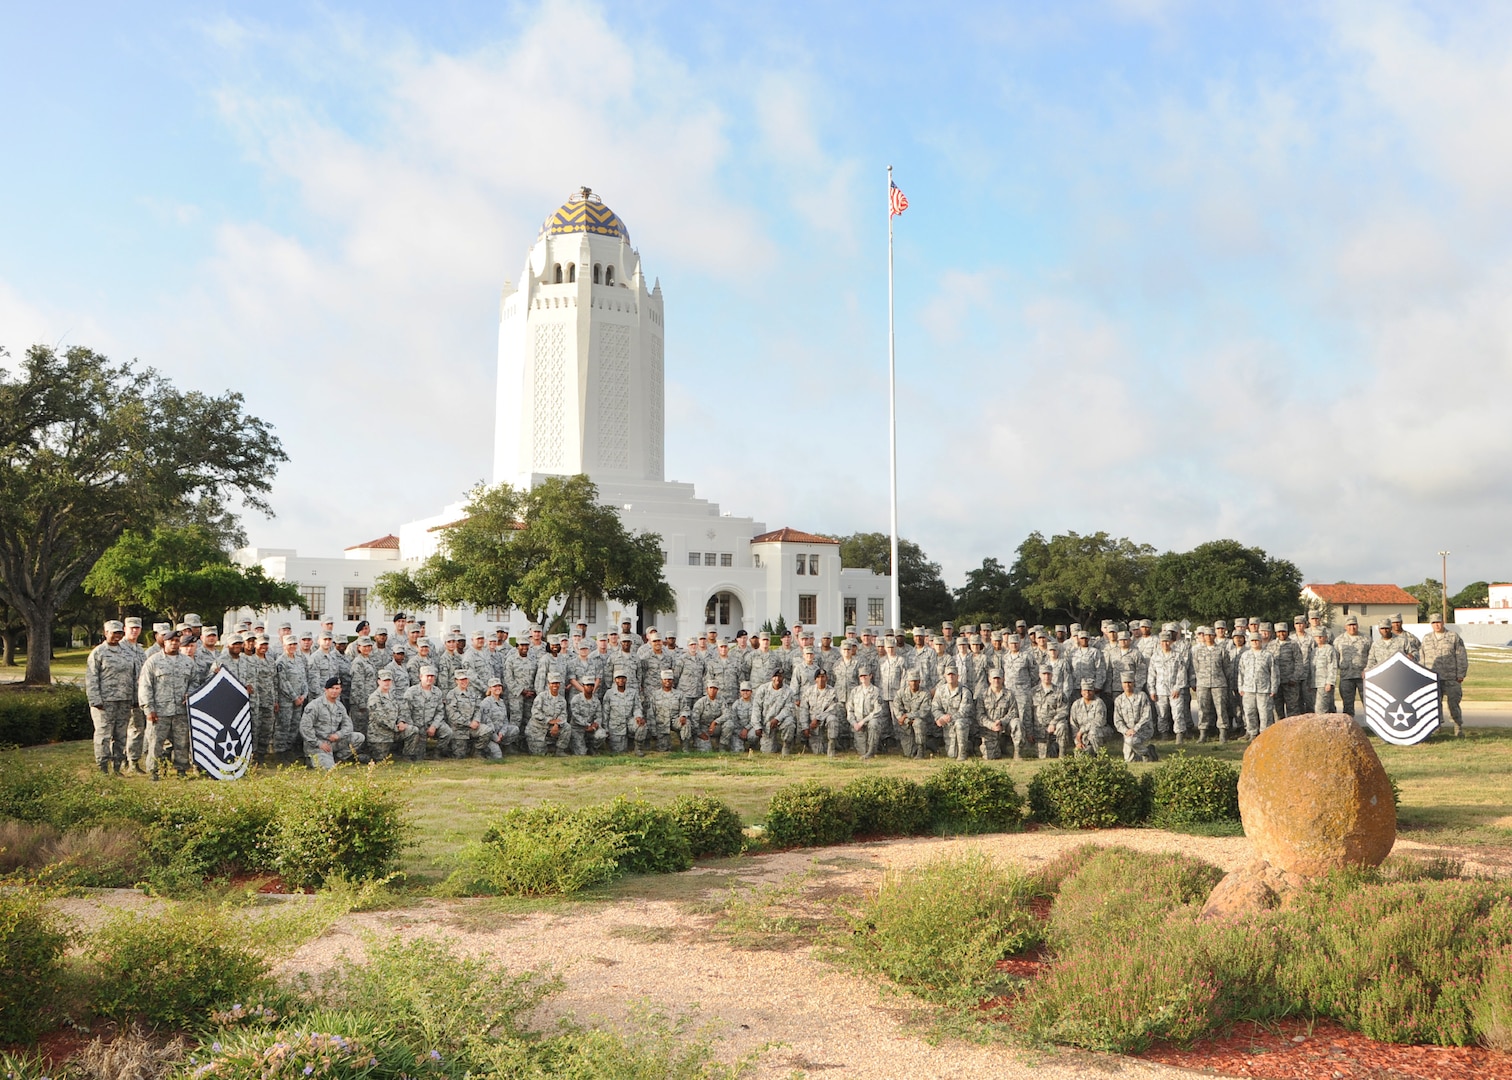 Joint Base San Antonio members who attended the five-day Senior NCO Professional Enhancement Seminar Aug. 5-9 gather Aug. 6 in front of the JBSA-Randolph Taj Mahal. The seminar is designed to  augment and reinforce information taught in Basic Military Training, technical training, ancillary training, professional military education and job experience. The SNCO PES is also designed to provide newly selected master sergeants with an in-depth view of their increased supervisory, leadership and managerial responsibilities, and provides assistance in making the transition to SNCO status more effective. The seminar was conducted for all master sergeant selects and newly selected master sergeants. courtesy photo)
